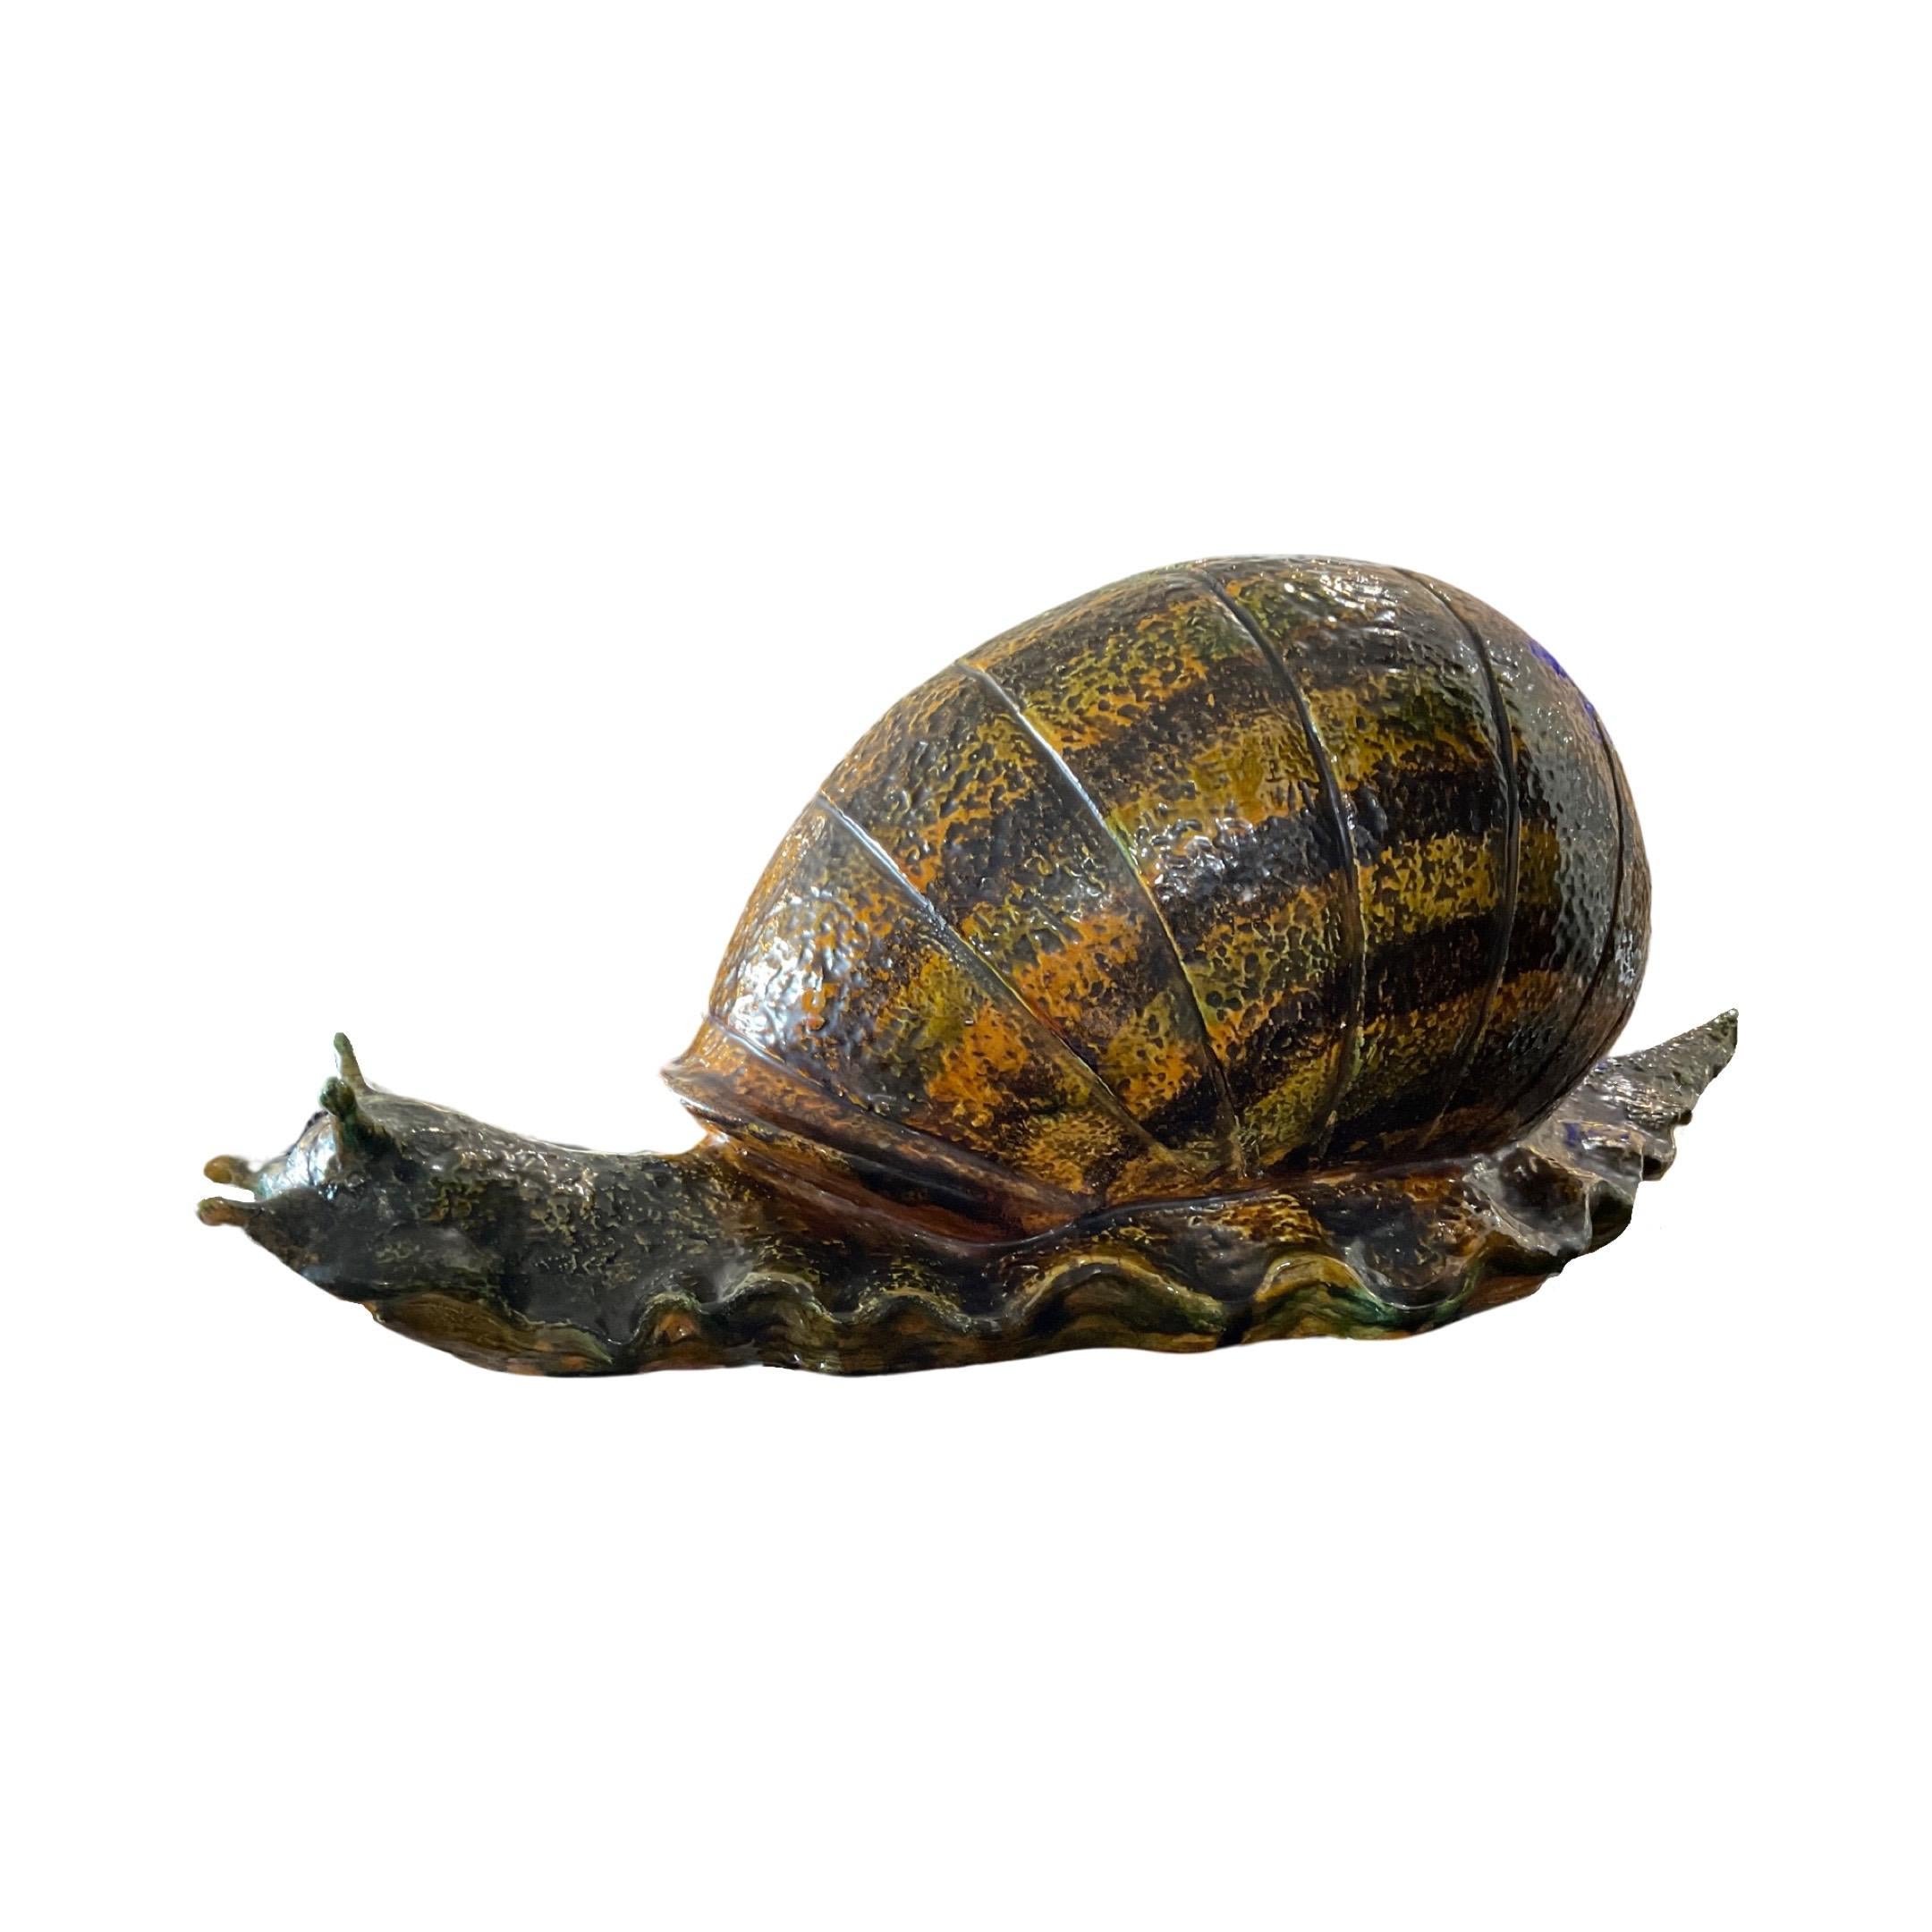 19th Century French Ceramic Snail Sculpture For Sale